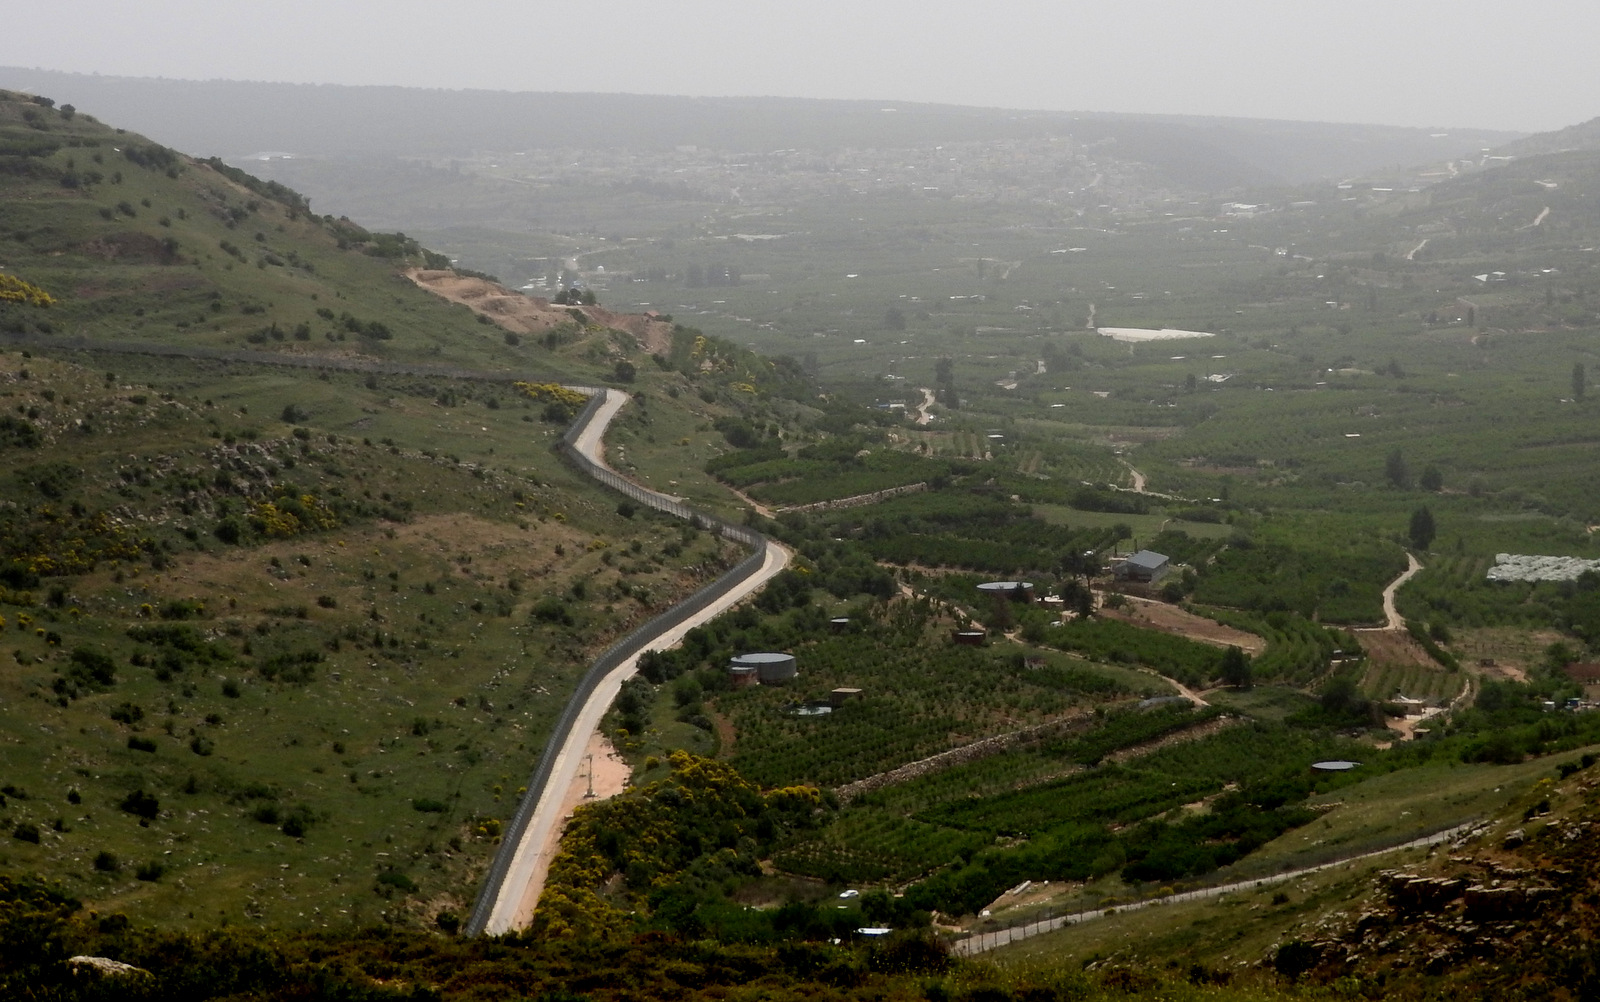 As Israeli road, heavily fortified, cuts through Syrian land on both sides in the occupied Golan Heights. Eva Bartlett | MintPress News